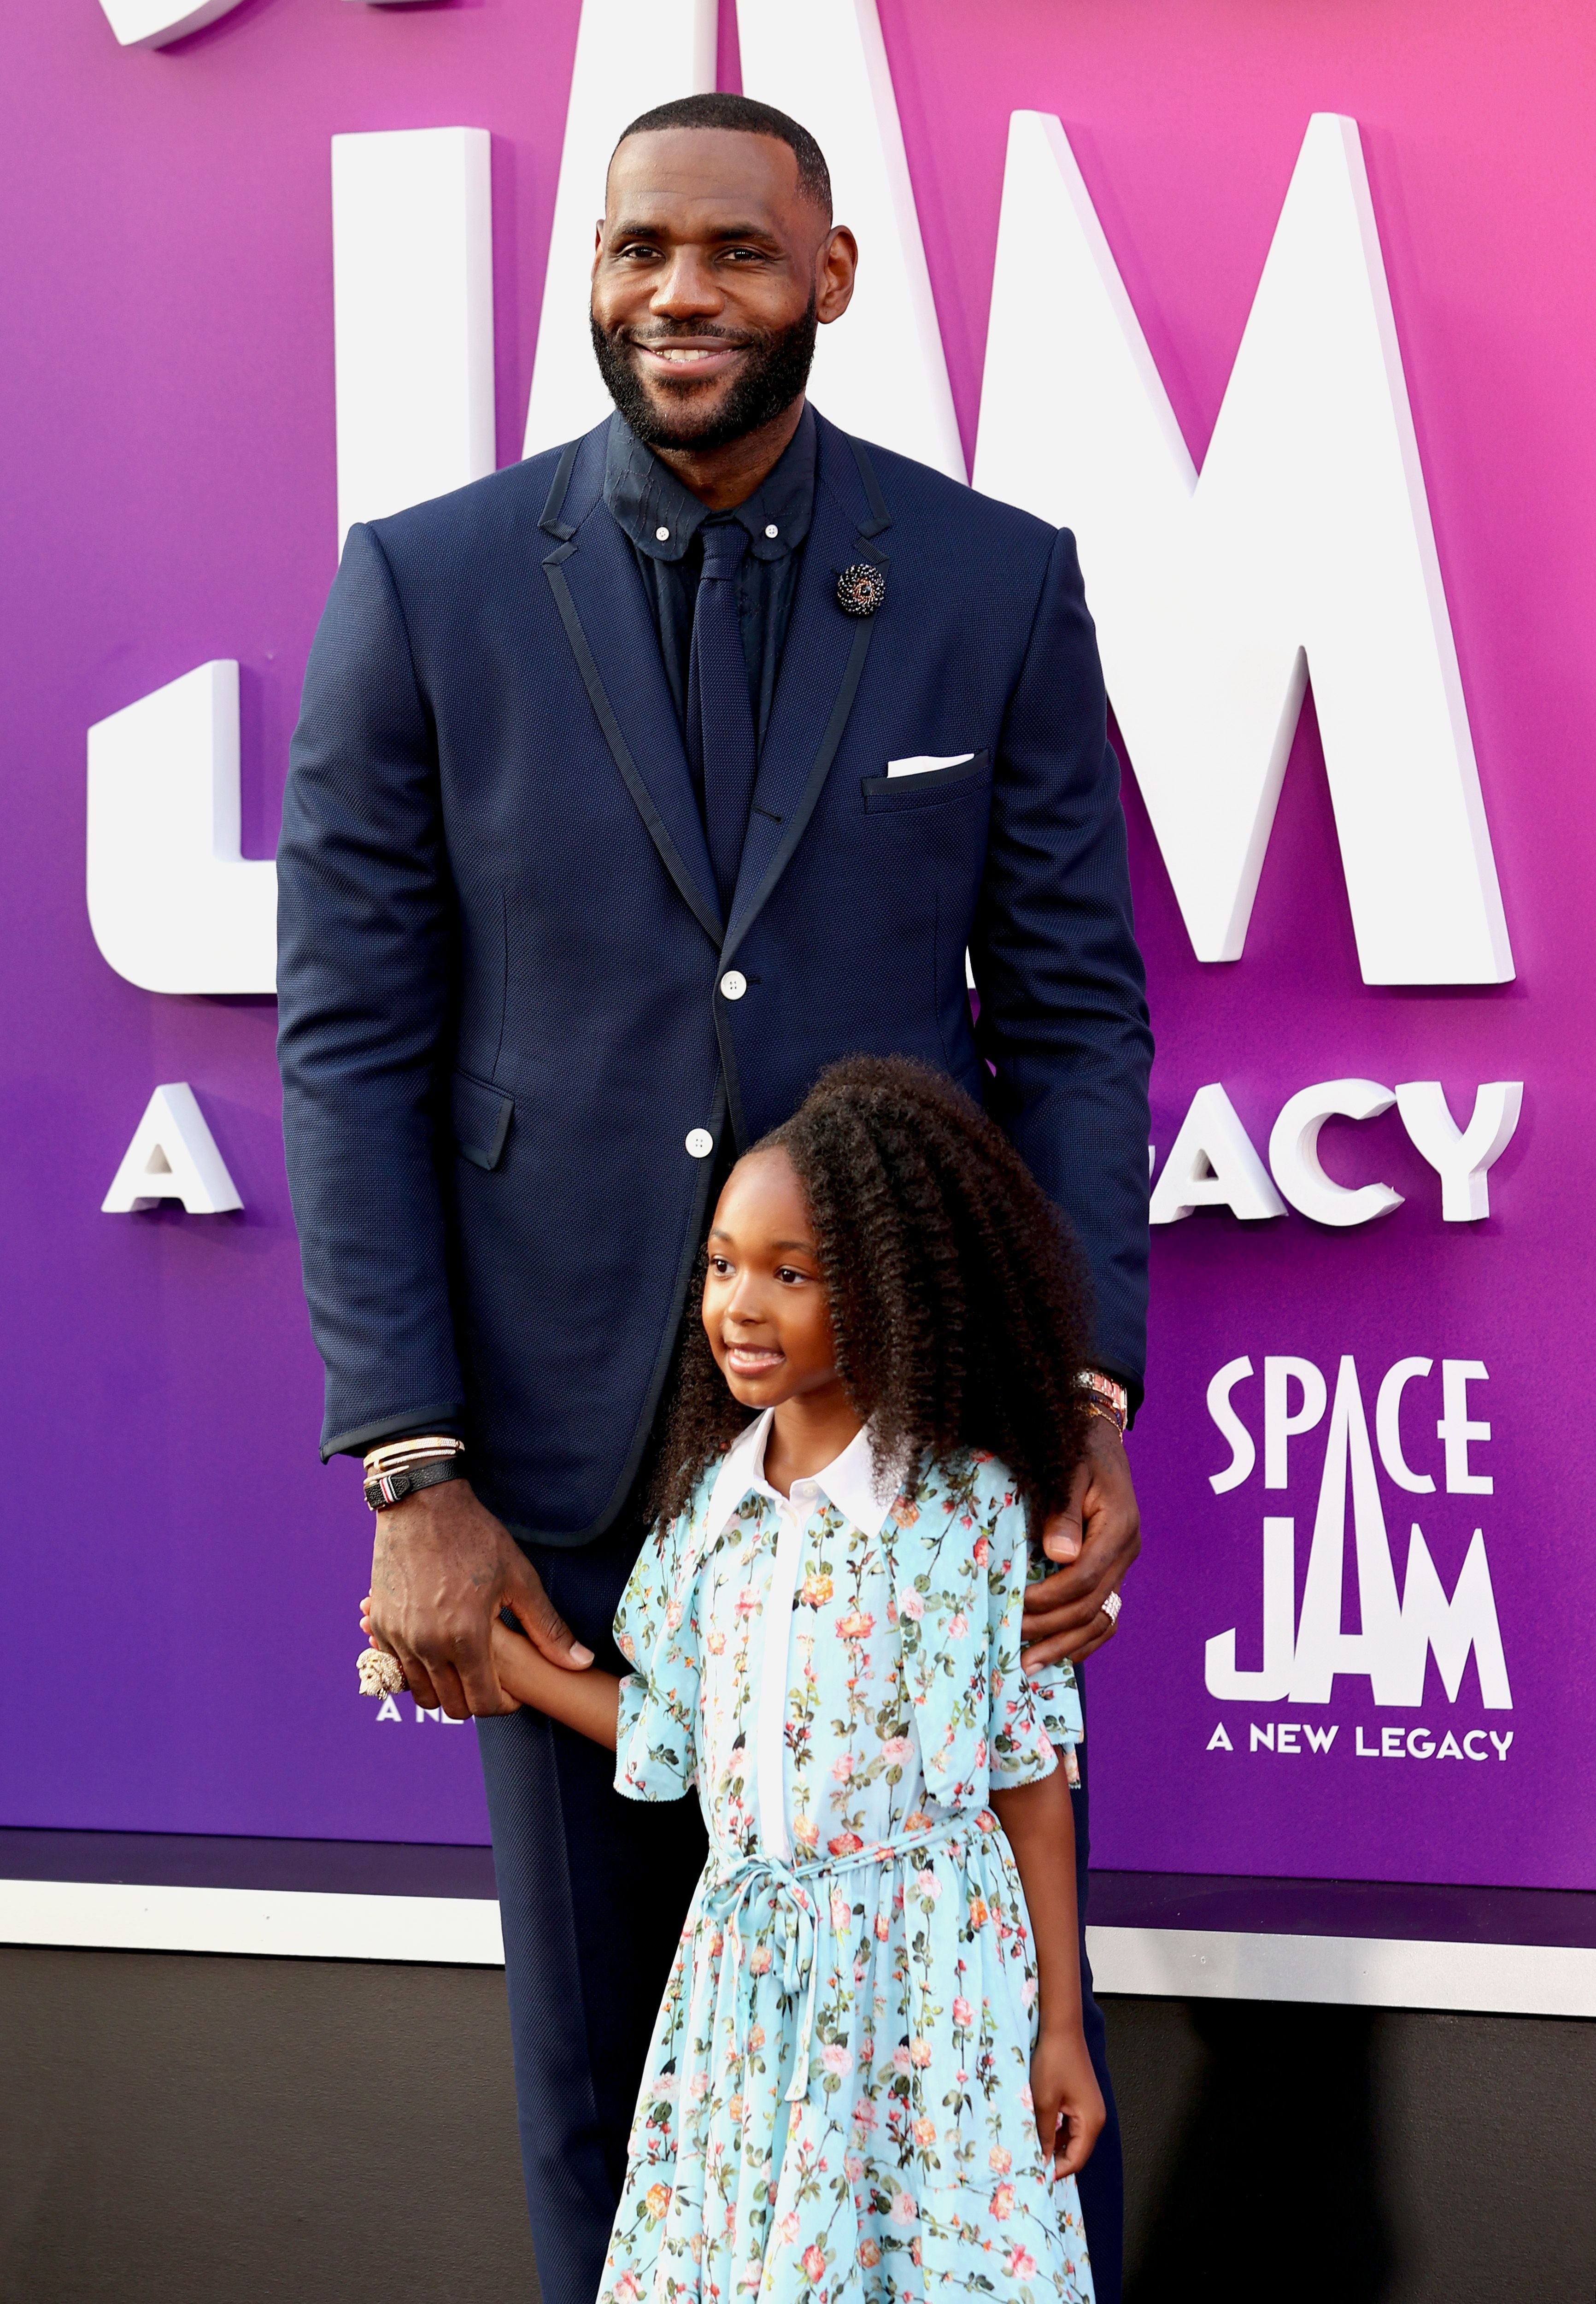 LeBron James Shares Videos Of His Daughter That Prove All His Kids